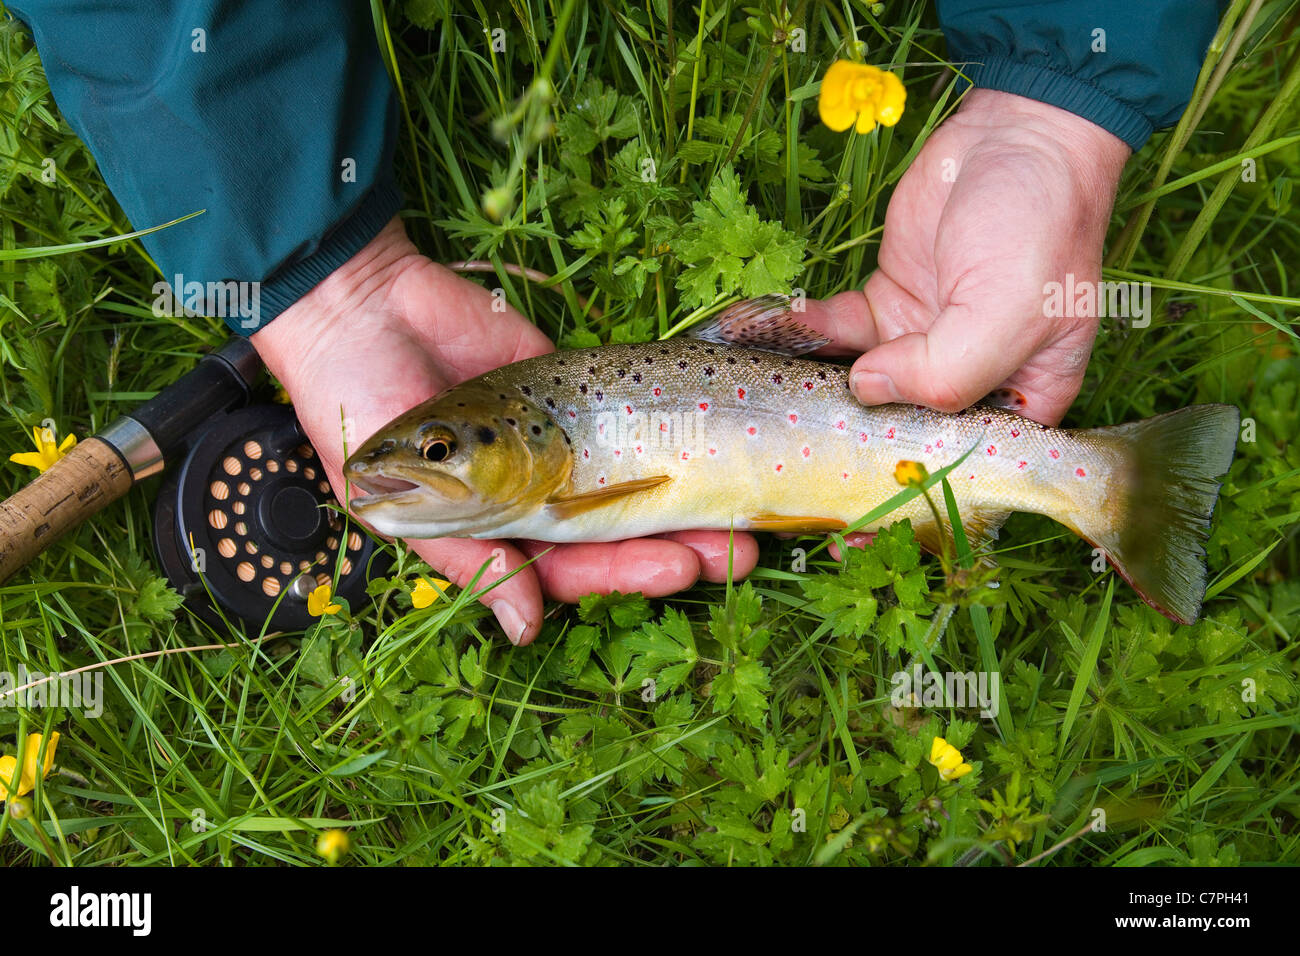 Fisherman holding brown trout in grass Banque D'Images